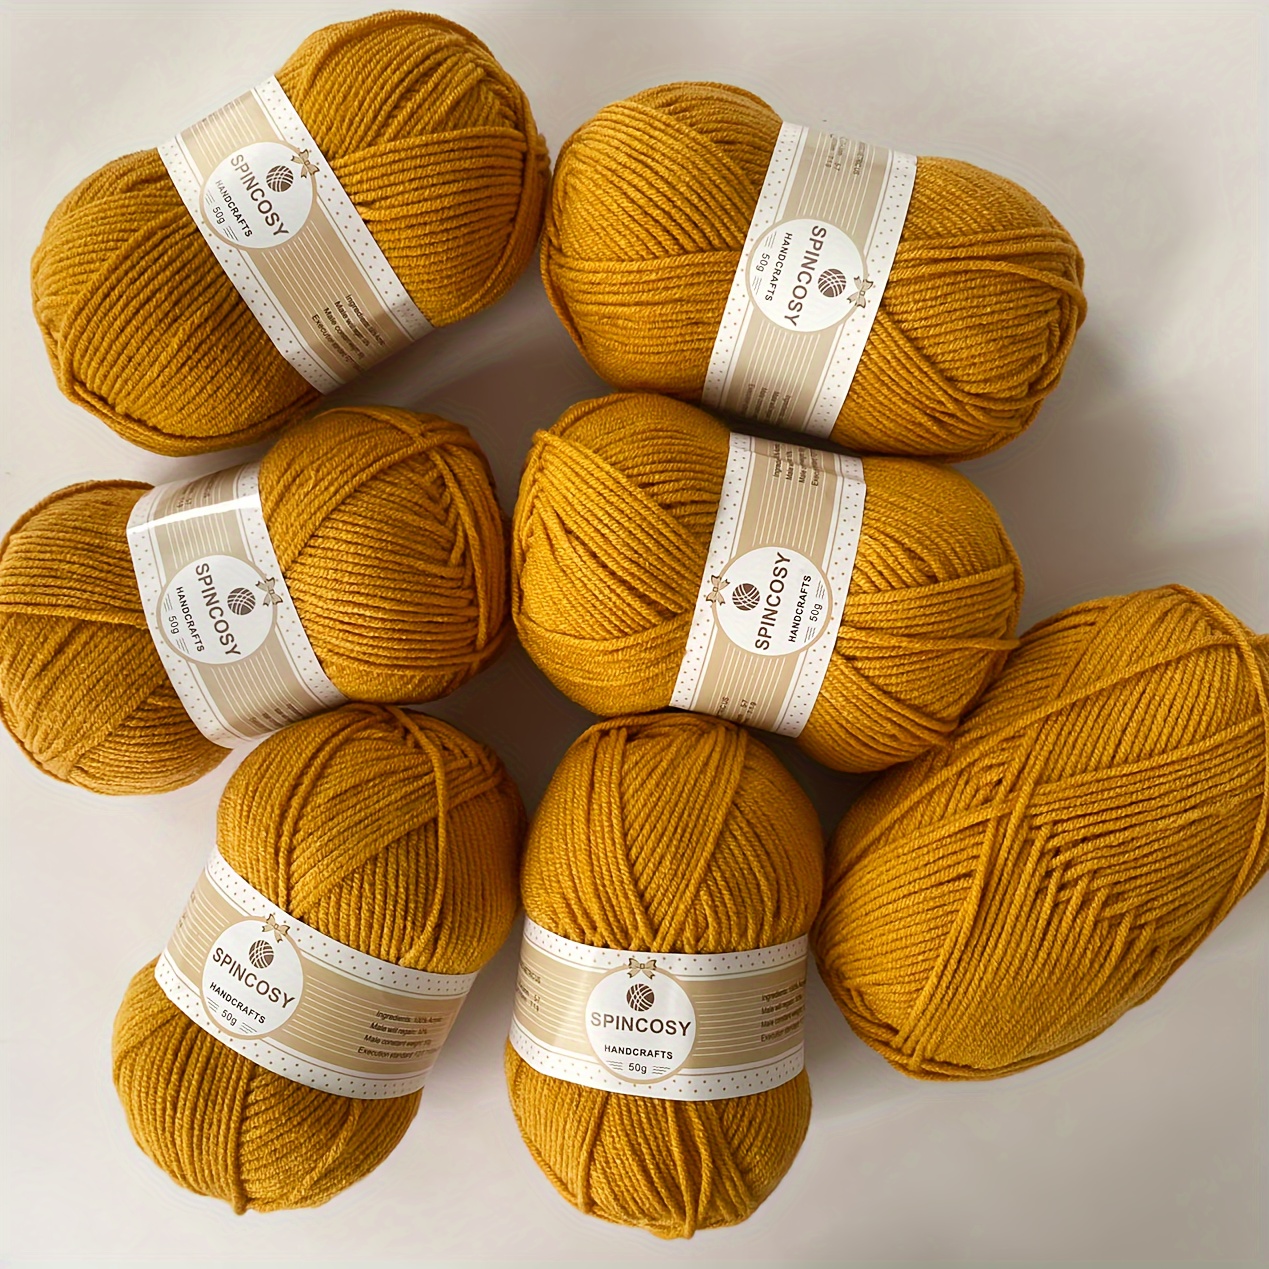 50% Wool Yarn for Crocheting,Thick Yarn for Crocheting,Crochet Yarn for  Crocheting,Yarn for Crafts,Crochet Yarn for Sweater,Scarf,Hat(Brown)